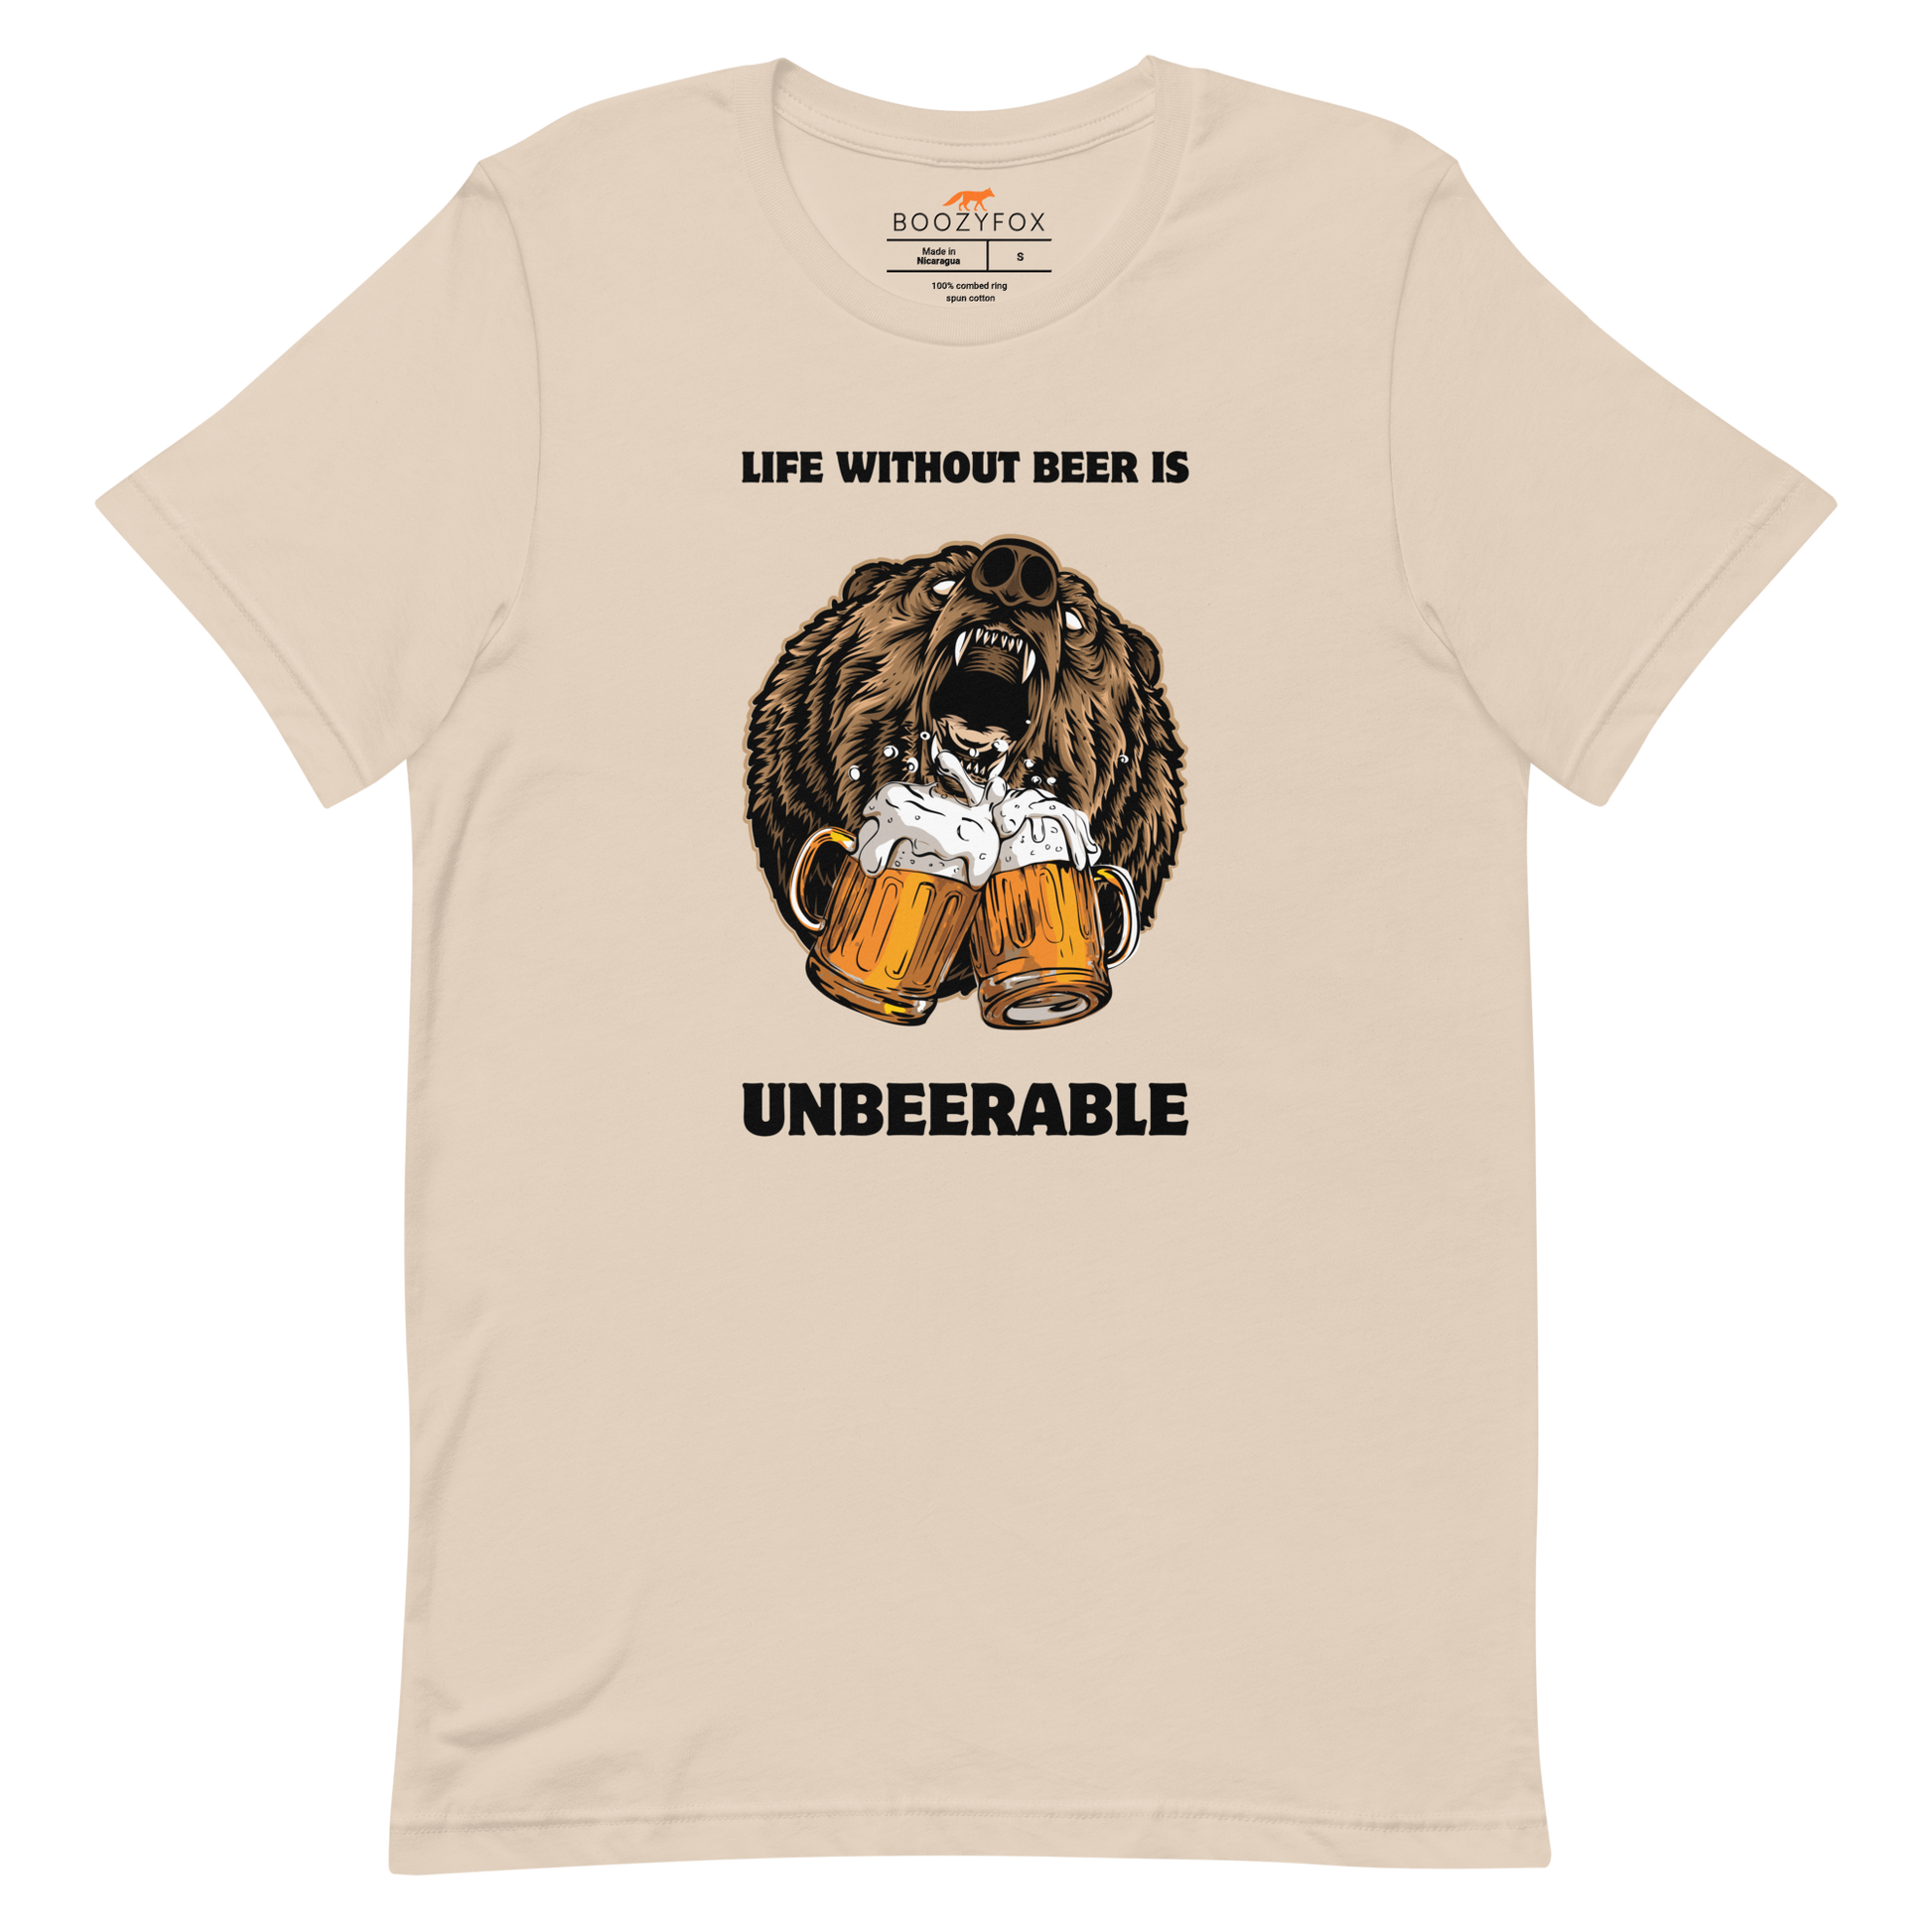 Soft Cream Premium Bear Tee featuring a Life Without Beer Is Unbeerable graphic design on the chest - Funny Graphic Bear Tees - Boozy Fox